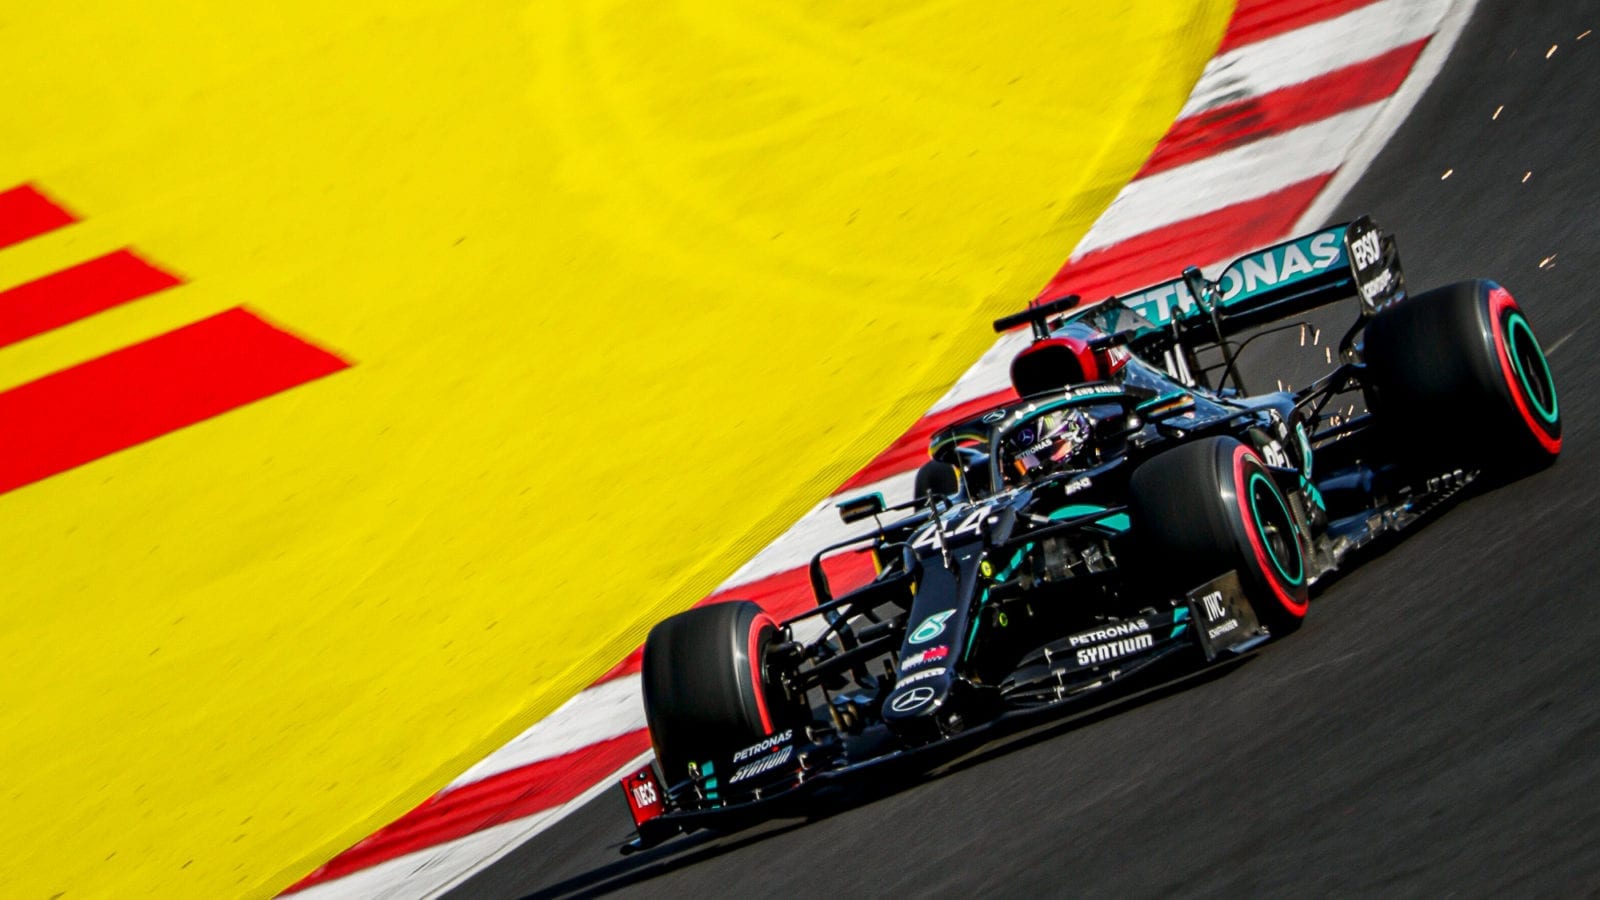 Lewis Hamilton on track at Portimao in qualifying for the 2020 Portuguese Grand Prix